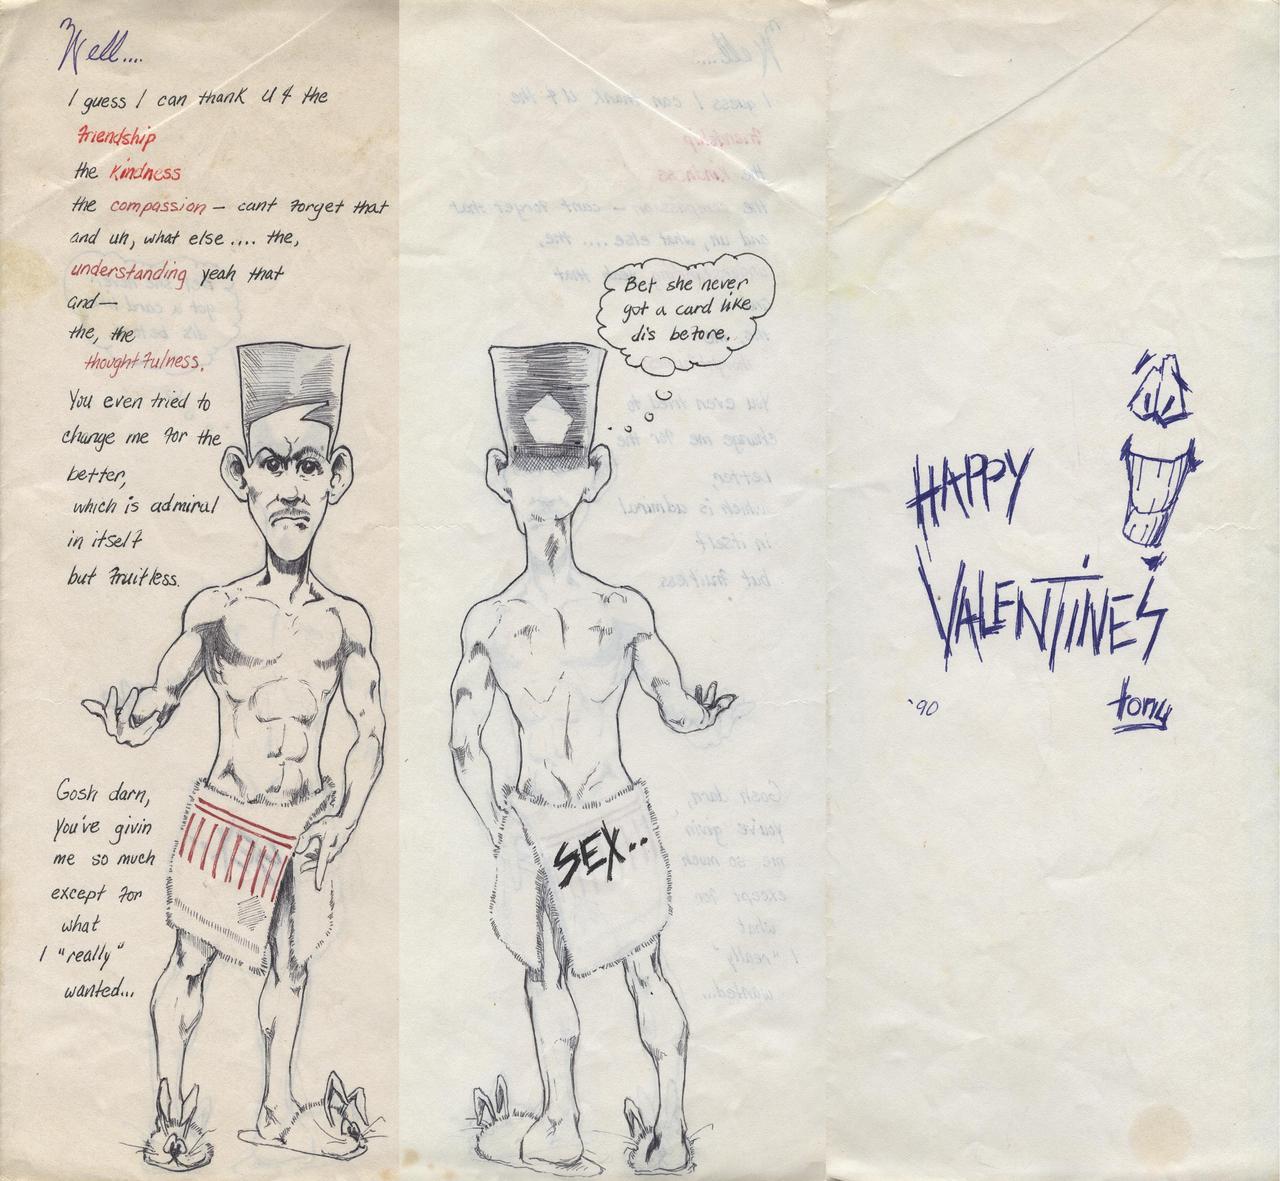 this was a valentines card for my then girlfriend, my first and only year of college. i guess it worked. she married me, inspite of my being a jack-ass. and even though we are divorced now, my fault of course, she is still my best friend.